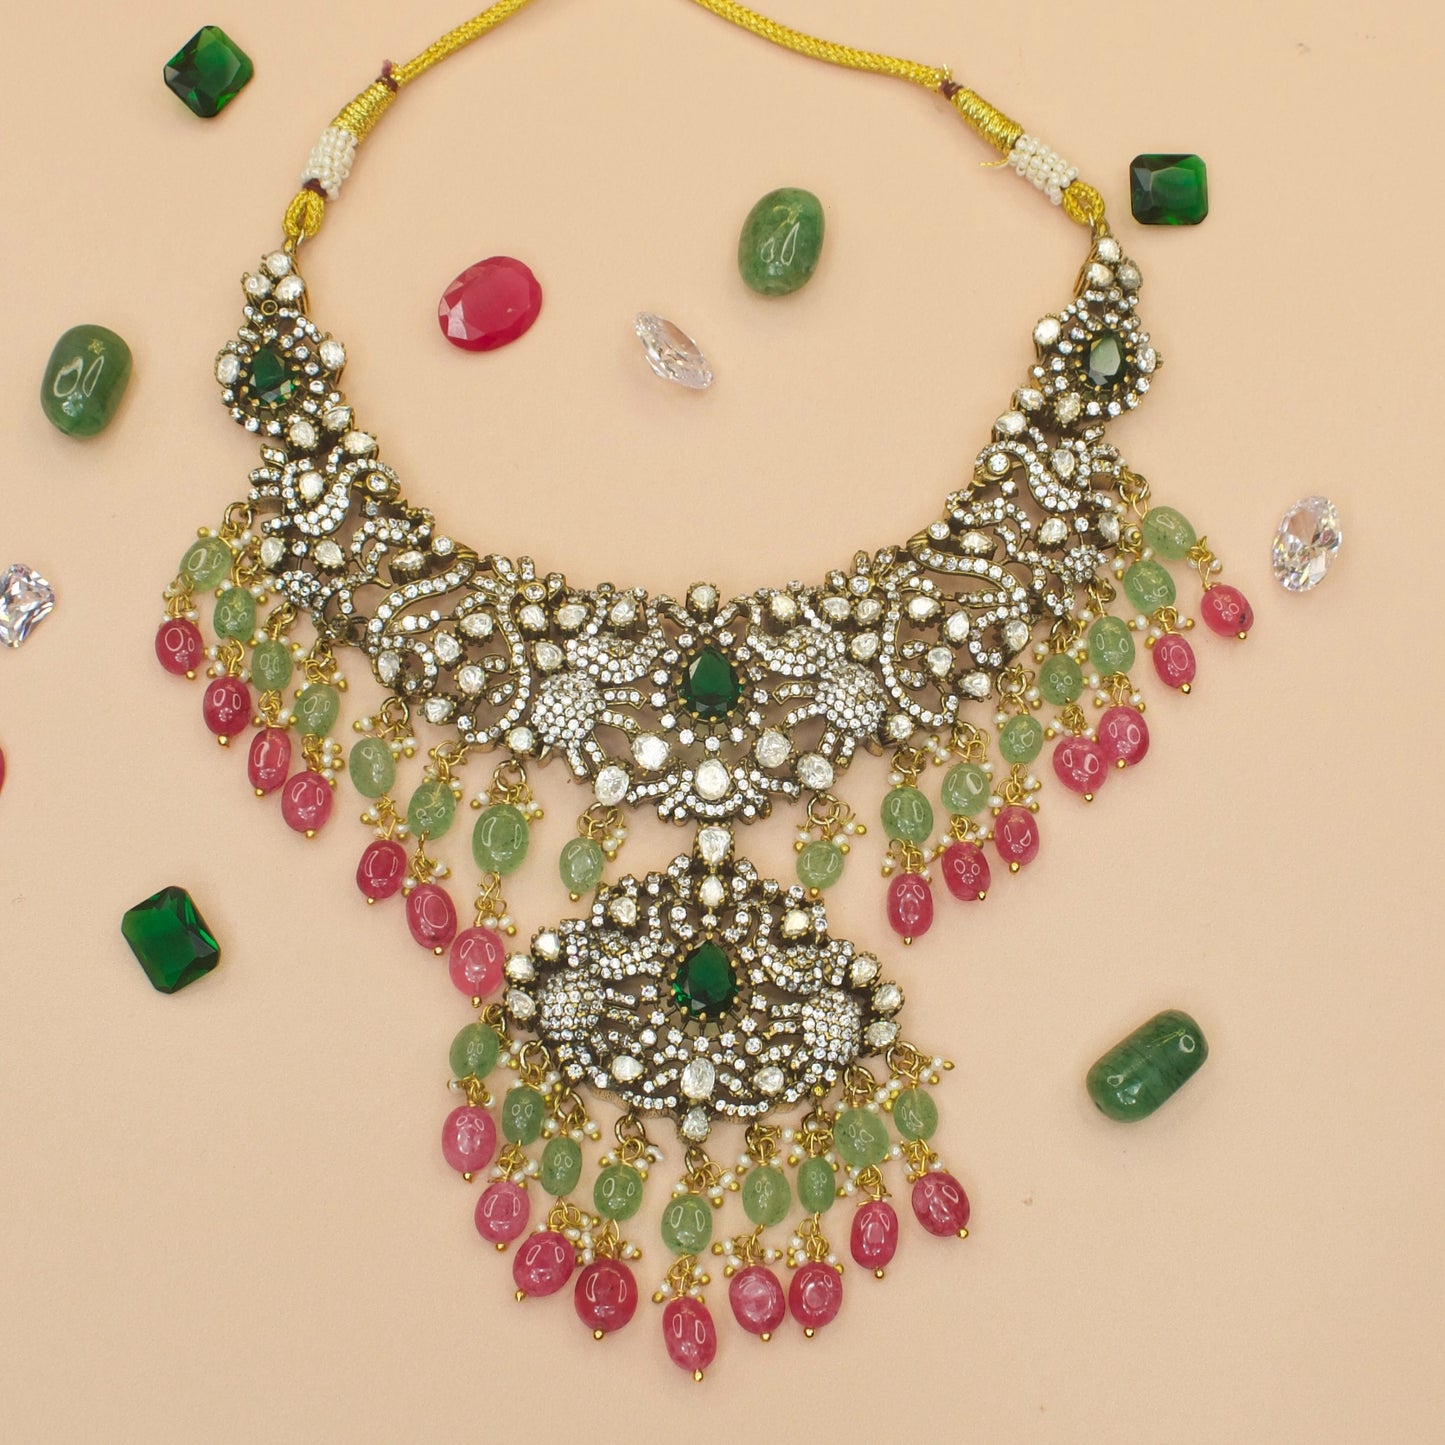 Antique Victorian Polki Necklace with chandbali earrings